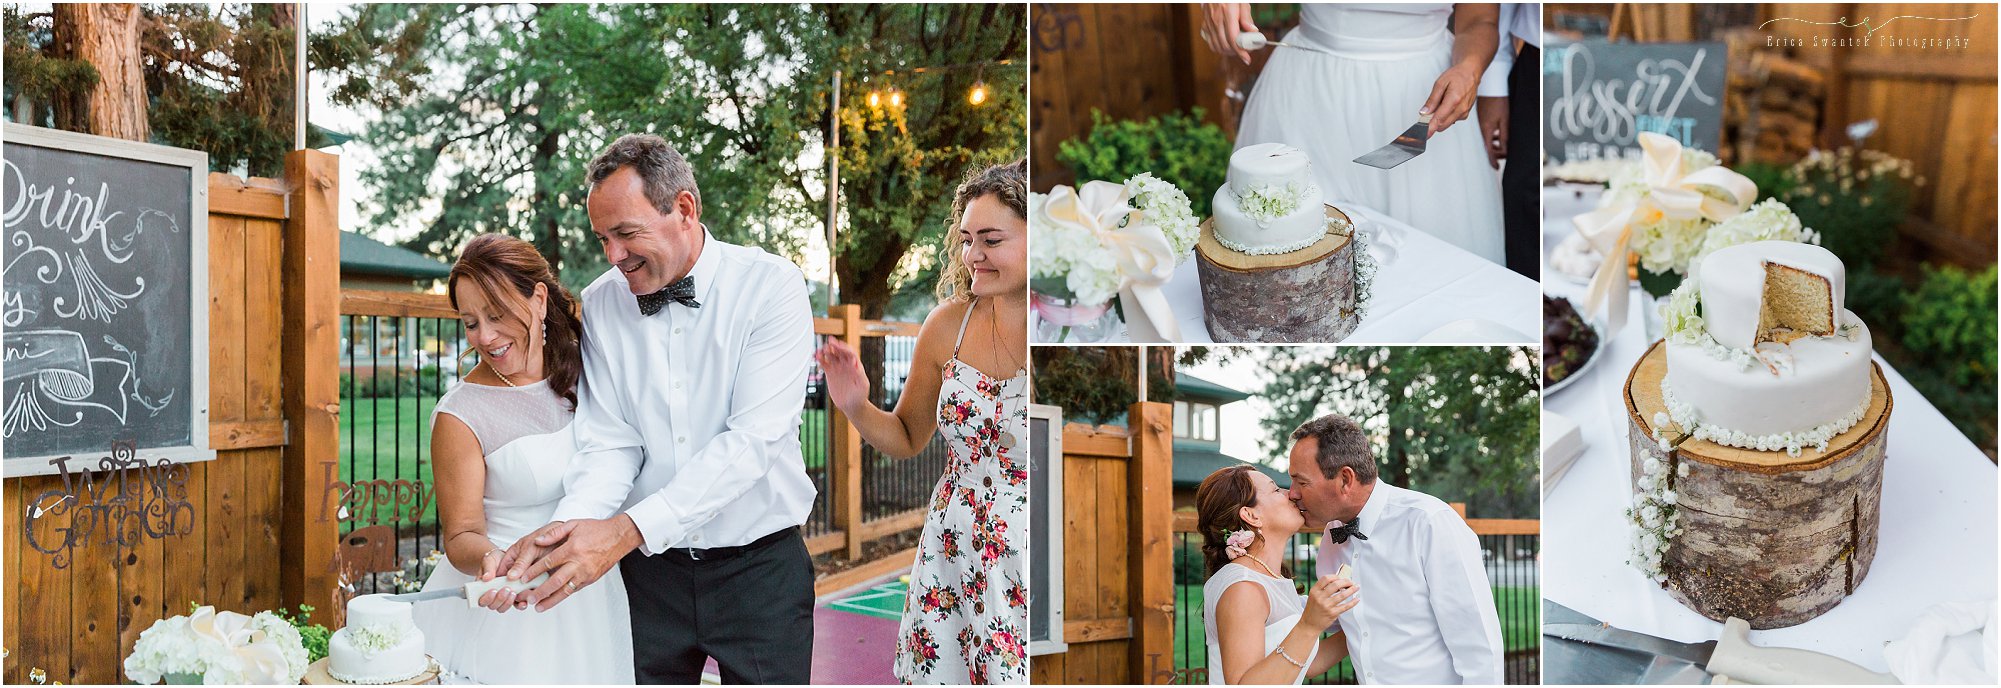 A beautiful outdoor wedding reception in Sisters, OR. | Erica Swantek Photography